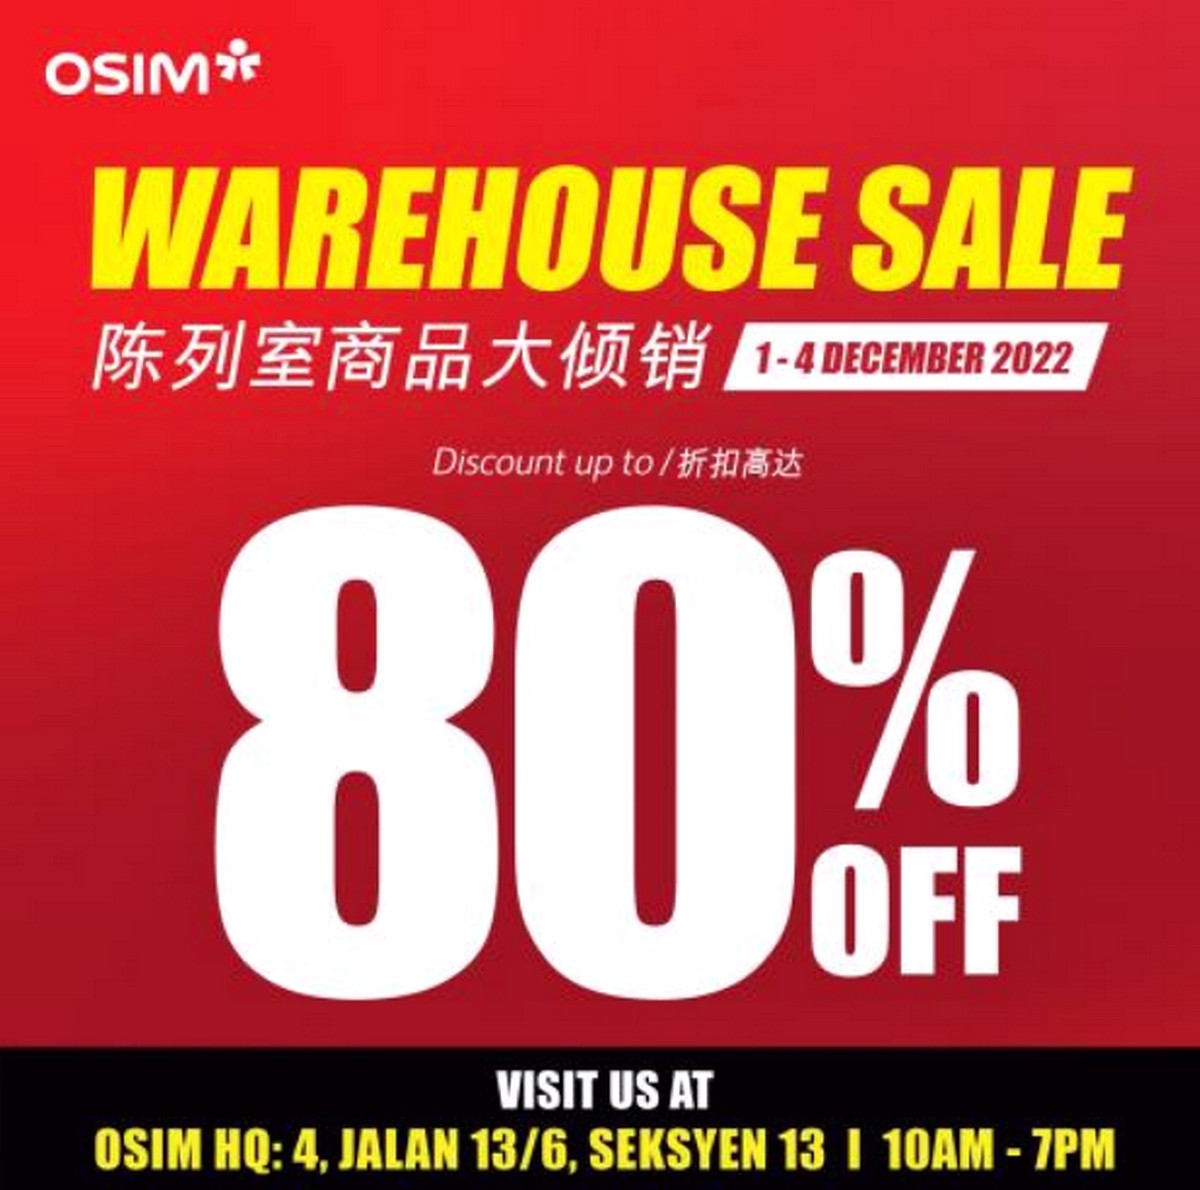 OSIM-Warehouse-Sale-2022-Malaysia-December-Christmas-Clearance-2023-New-Year-Stock-Discounts-Massage-CHairs - Beauty & Health Electronics & Computers Furniture Home & Garden & Tools Home Appliances Kuala Lumpur Massage Personal Care Selangor Treatments Warehouse Sale & Clearance in Malaysia 